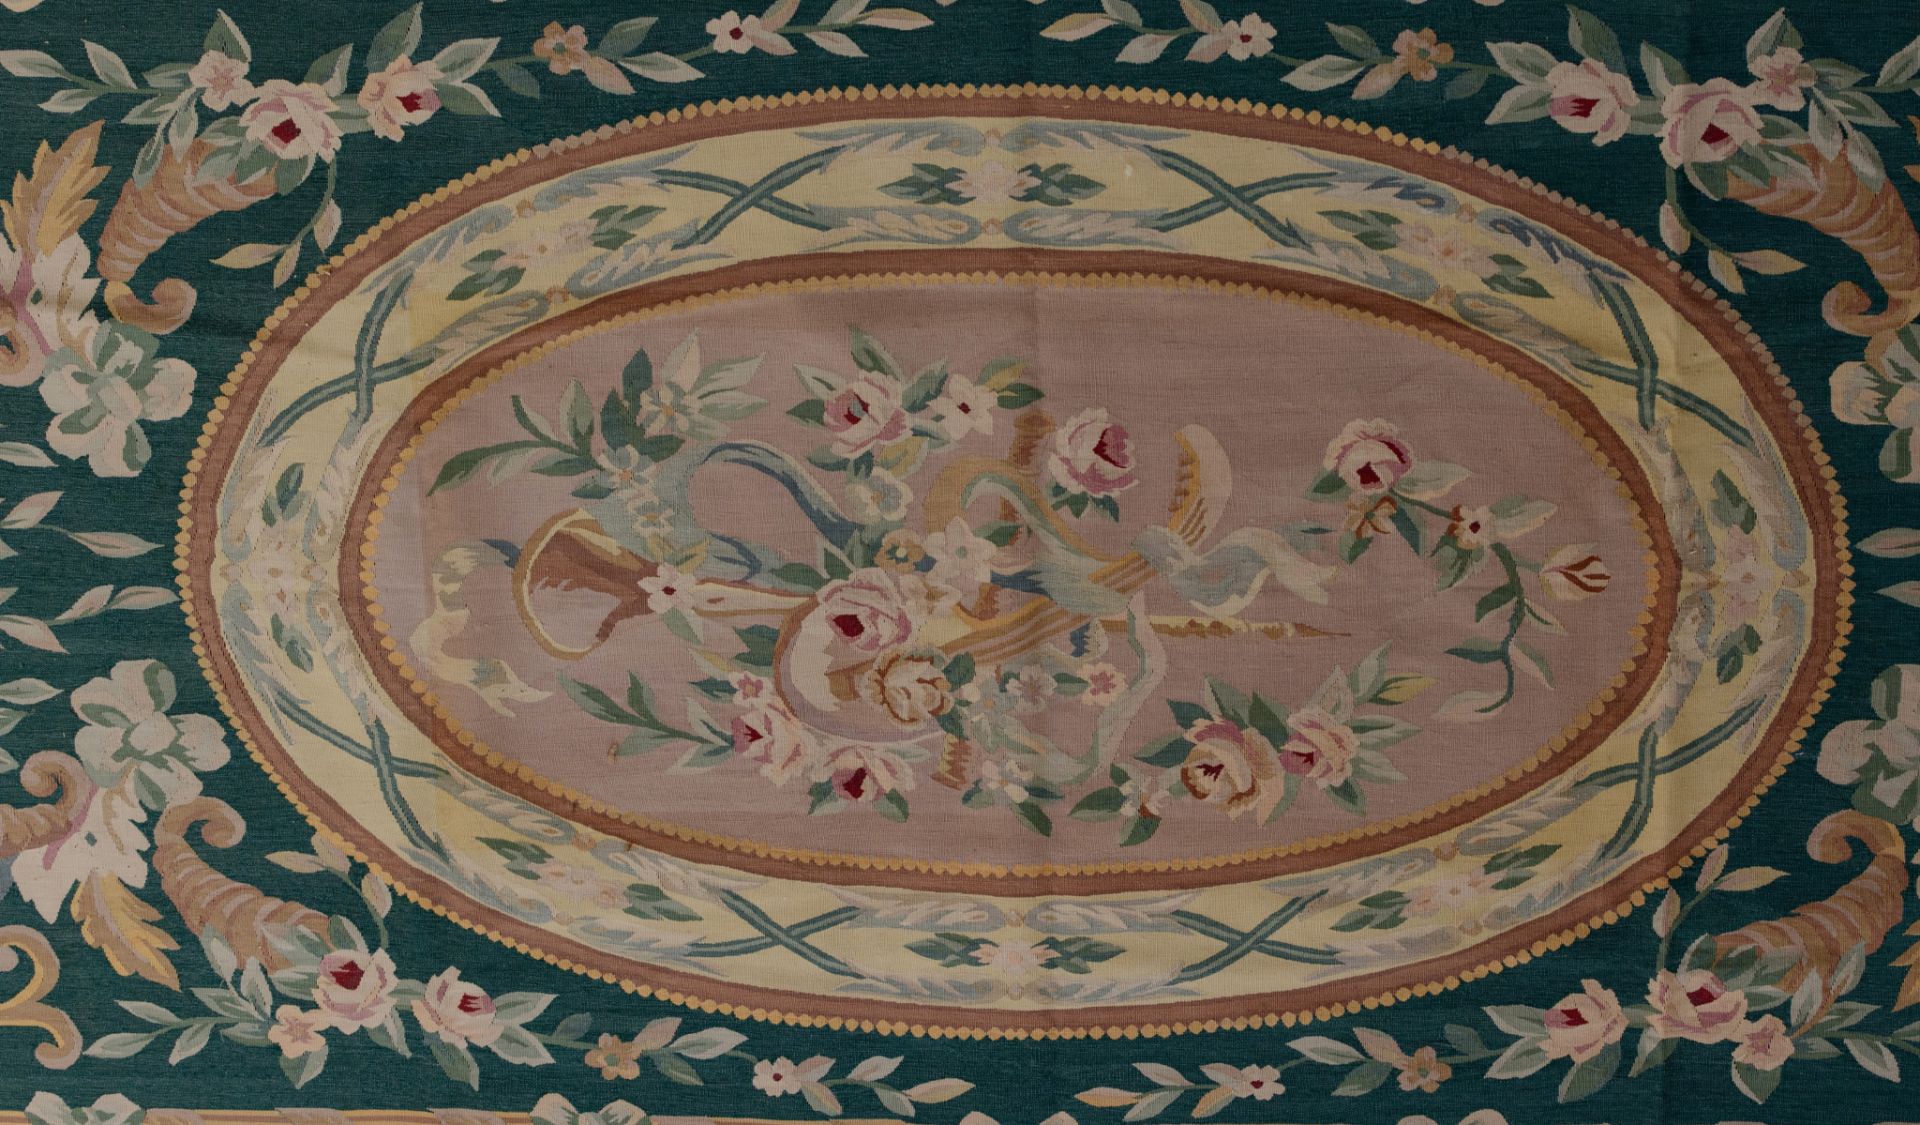 A large Aubusson rug, 553 x 370 cm - Image 6 of 9